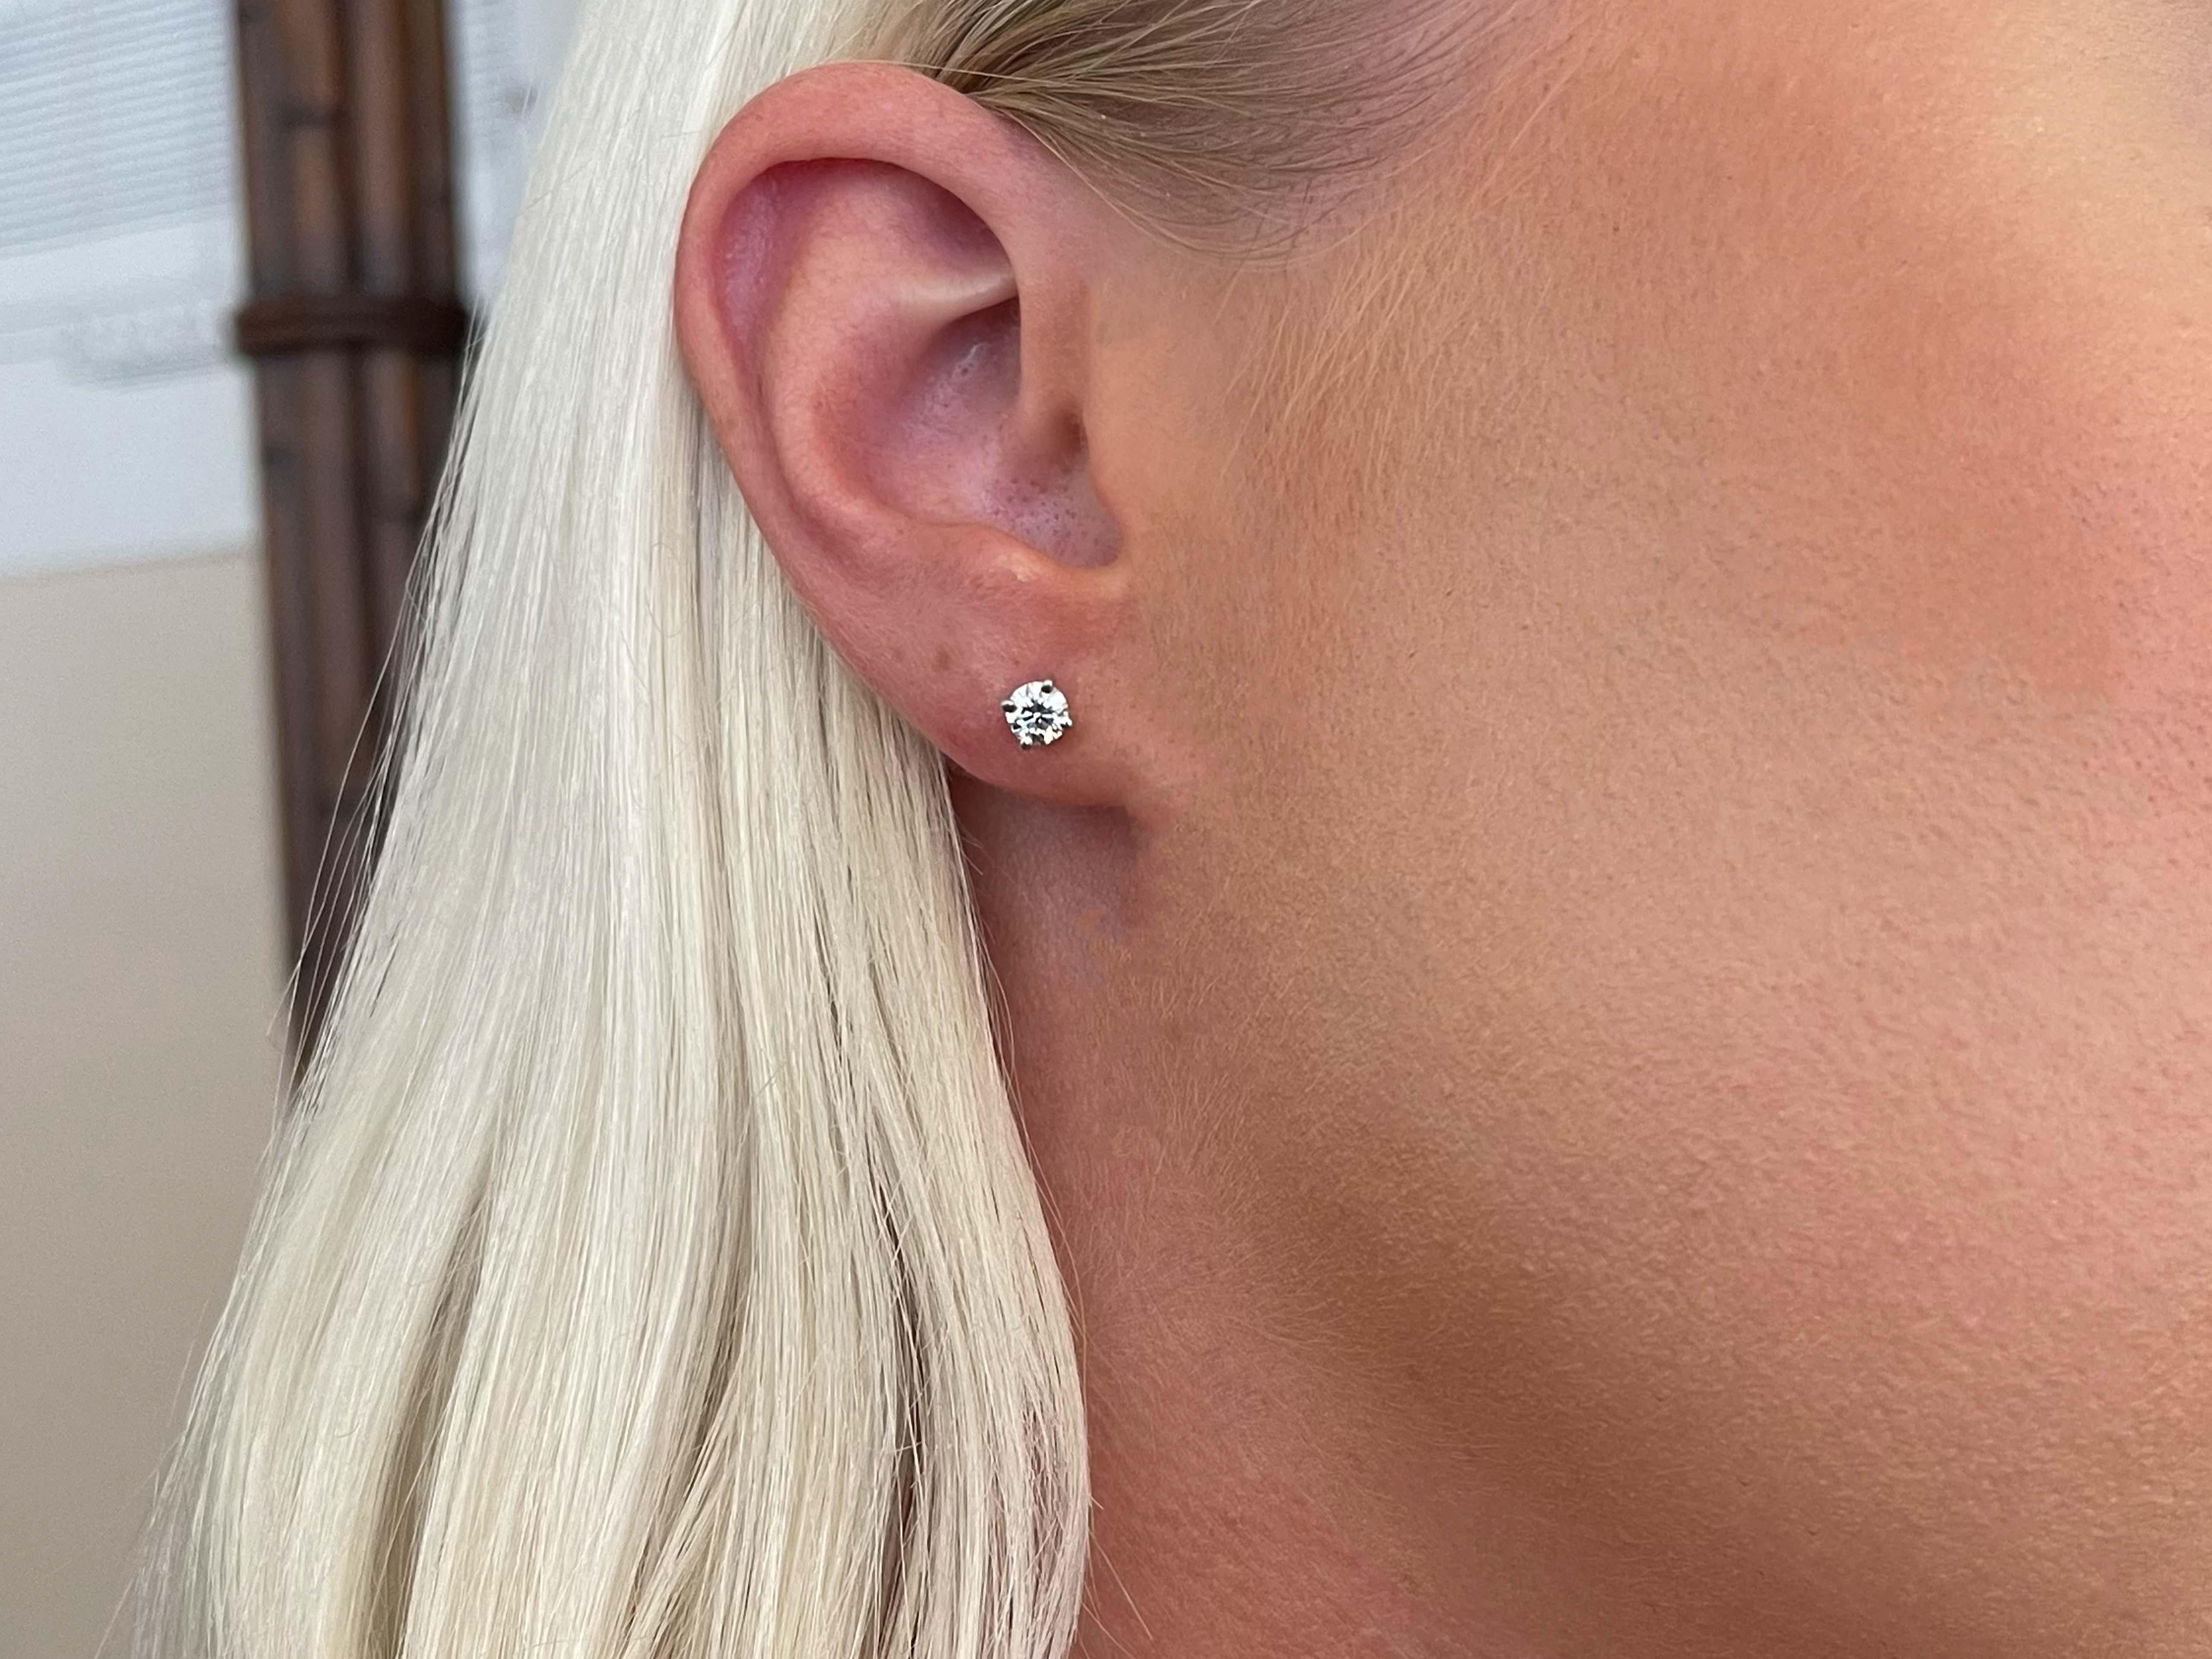 These gorgeous earrings each feature a round brilliant cut diamond prong set, with a total carat weight of 0.58 carats. The diamonds are H, VS2 and have beautiful sparkle. These earrings are beautifully crafted in platinum with a high polished